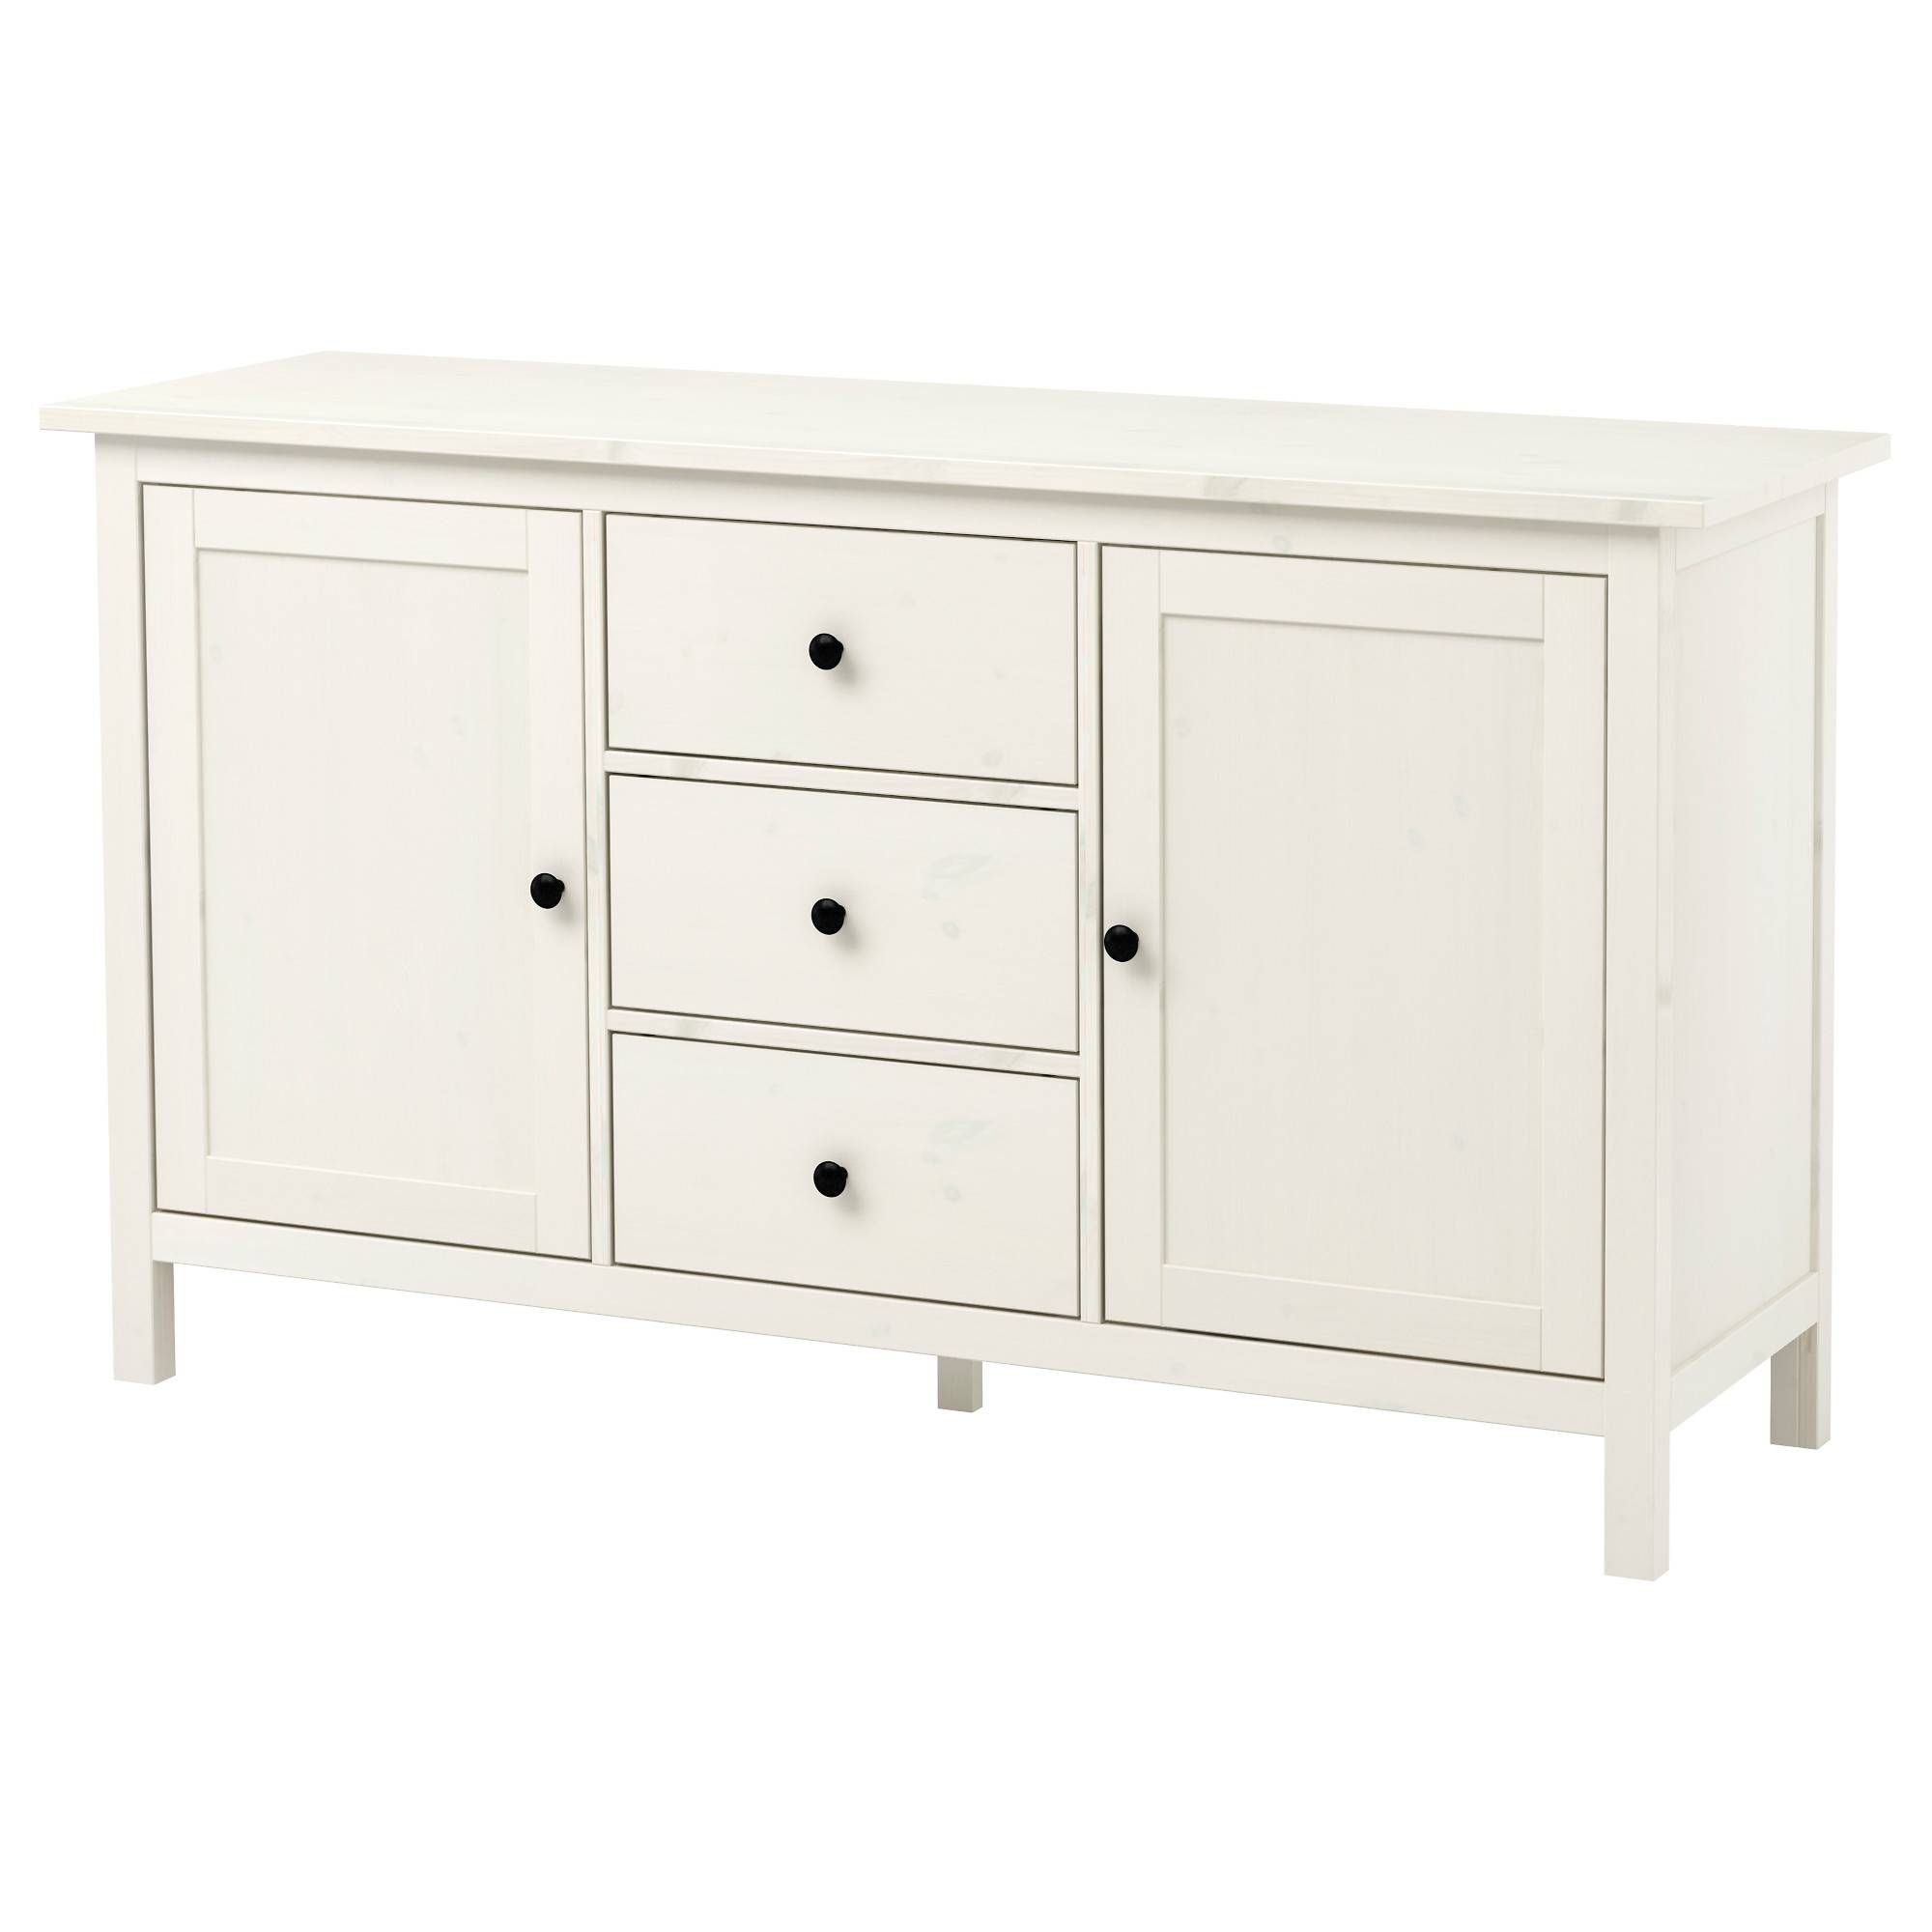 Hemnes Sideboard White Stain 157x88 Cm – Ikea Intended For Large White Sideboards (View 9 of 15)